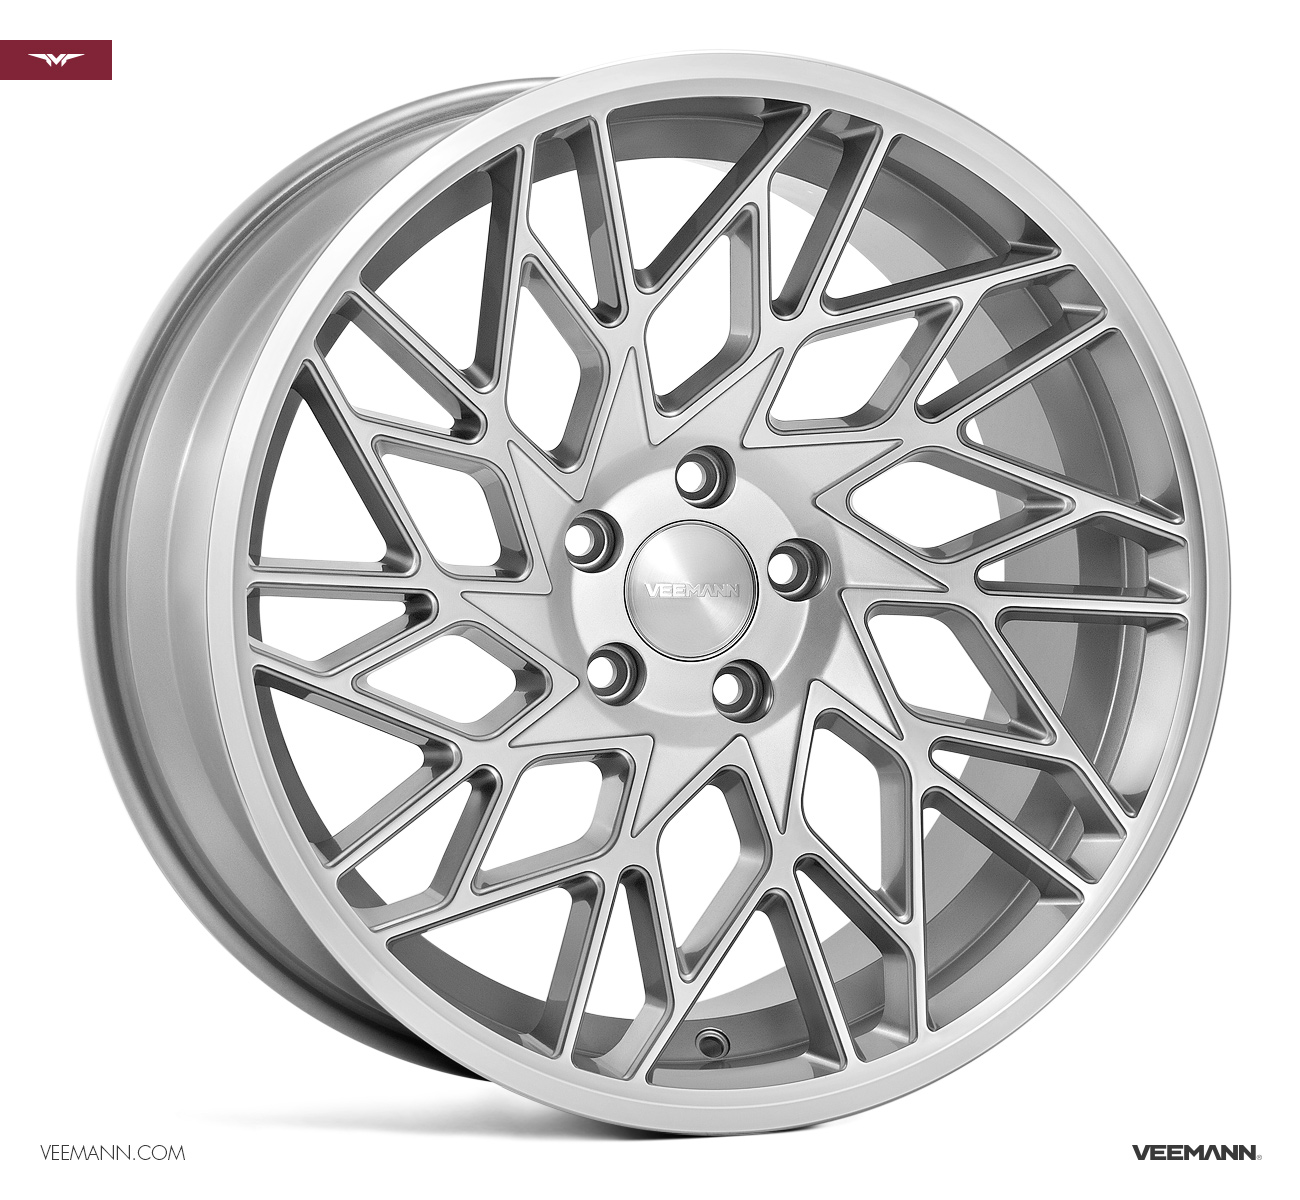 NEW 19  VEEMANN V FS29R ALLOY WHEELS IN SILVER POL WITH WIDER 9 5  REARS